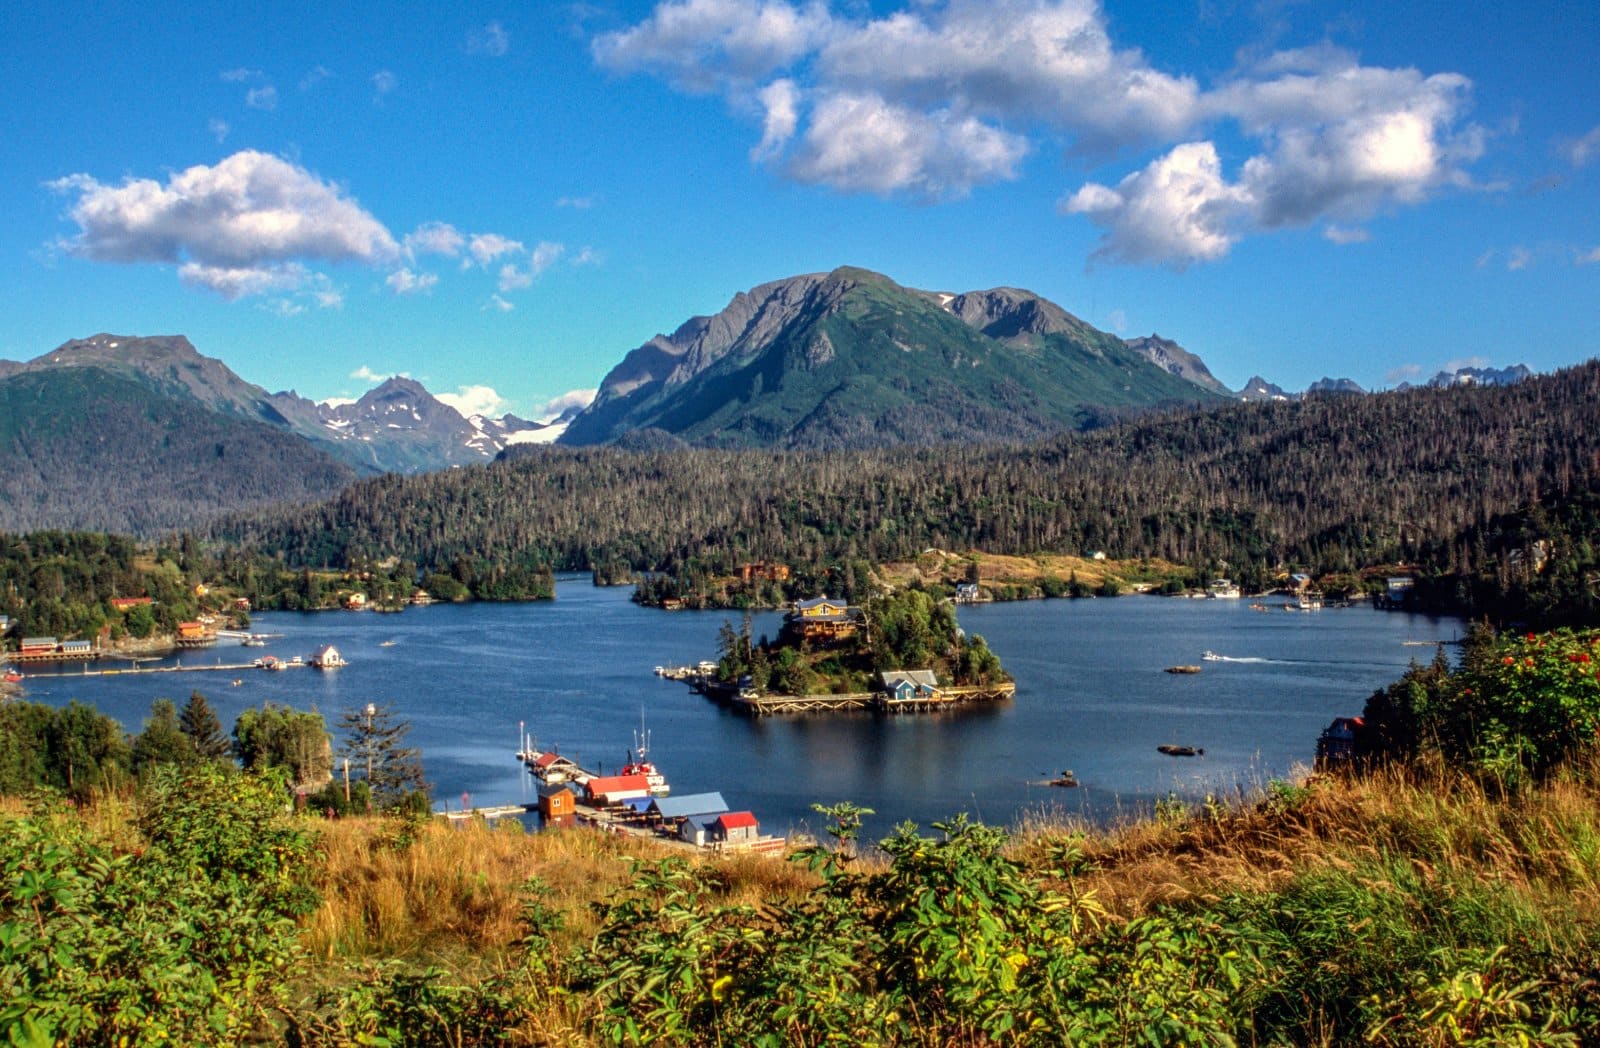 <p class="wp-caption-text">Image Credit: Shutterstock / CSNafzger</p>  <p><span>Homer, known as the “Halibut Fishing Capital of the World,” is a picturesque town on Alaska’s Kenai Peninsula. It’s celebrated for its stunning landscapes, including Kachemak Bay State Park and the Homer Spit, a long strip of land extending into the bay. Homer’s vibrant arts community, with galleries and studios, reflects the town’s creative spirit. Outdoor activities abound, from fishing and kayaking to bear viewing and hiking. The Alaska Islands and Ocean Visitor Center provides insights into local marine life and ecosystems.</span></p>